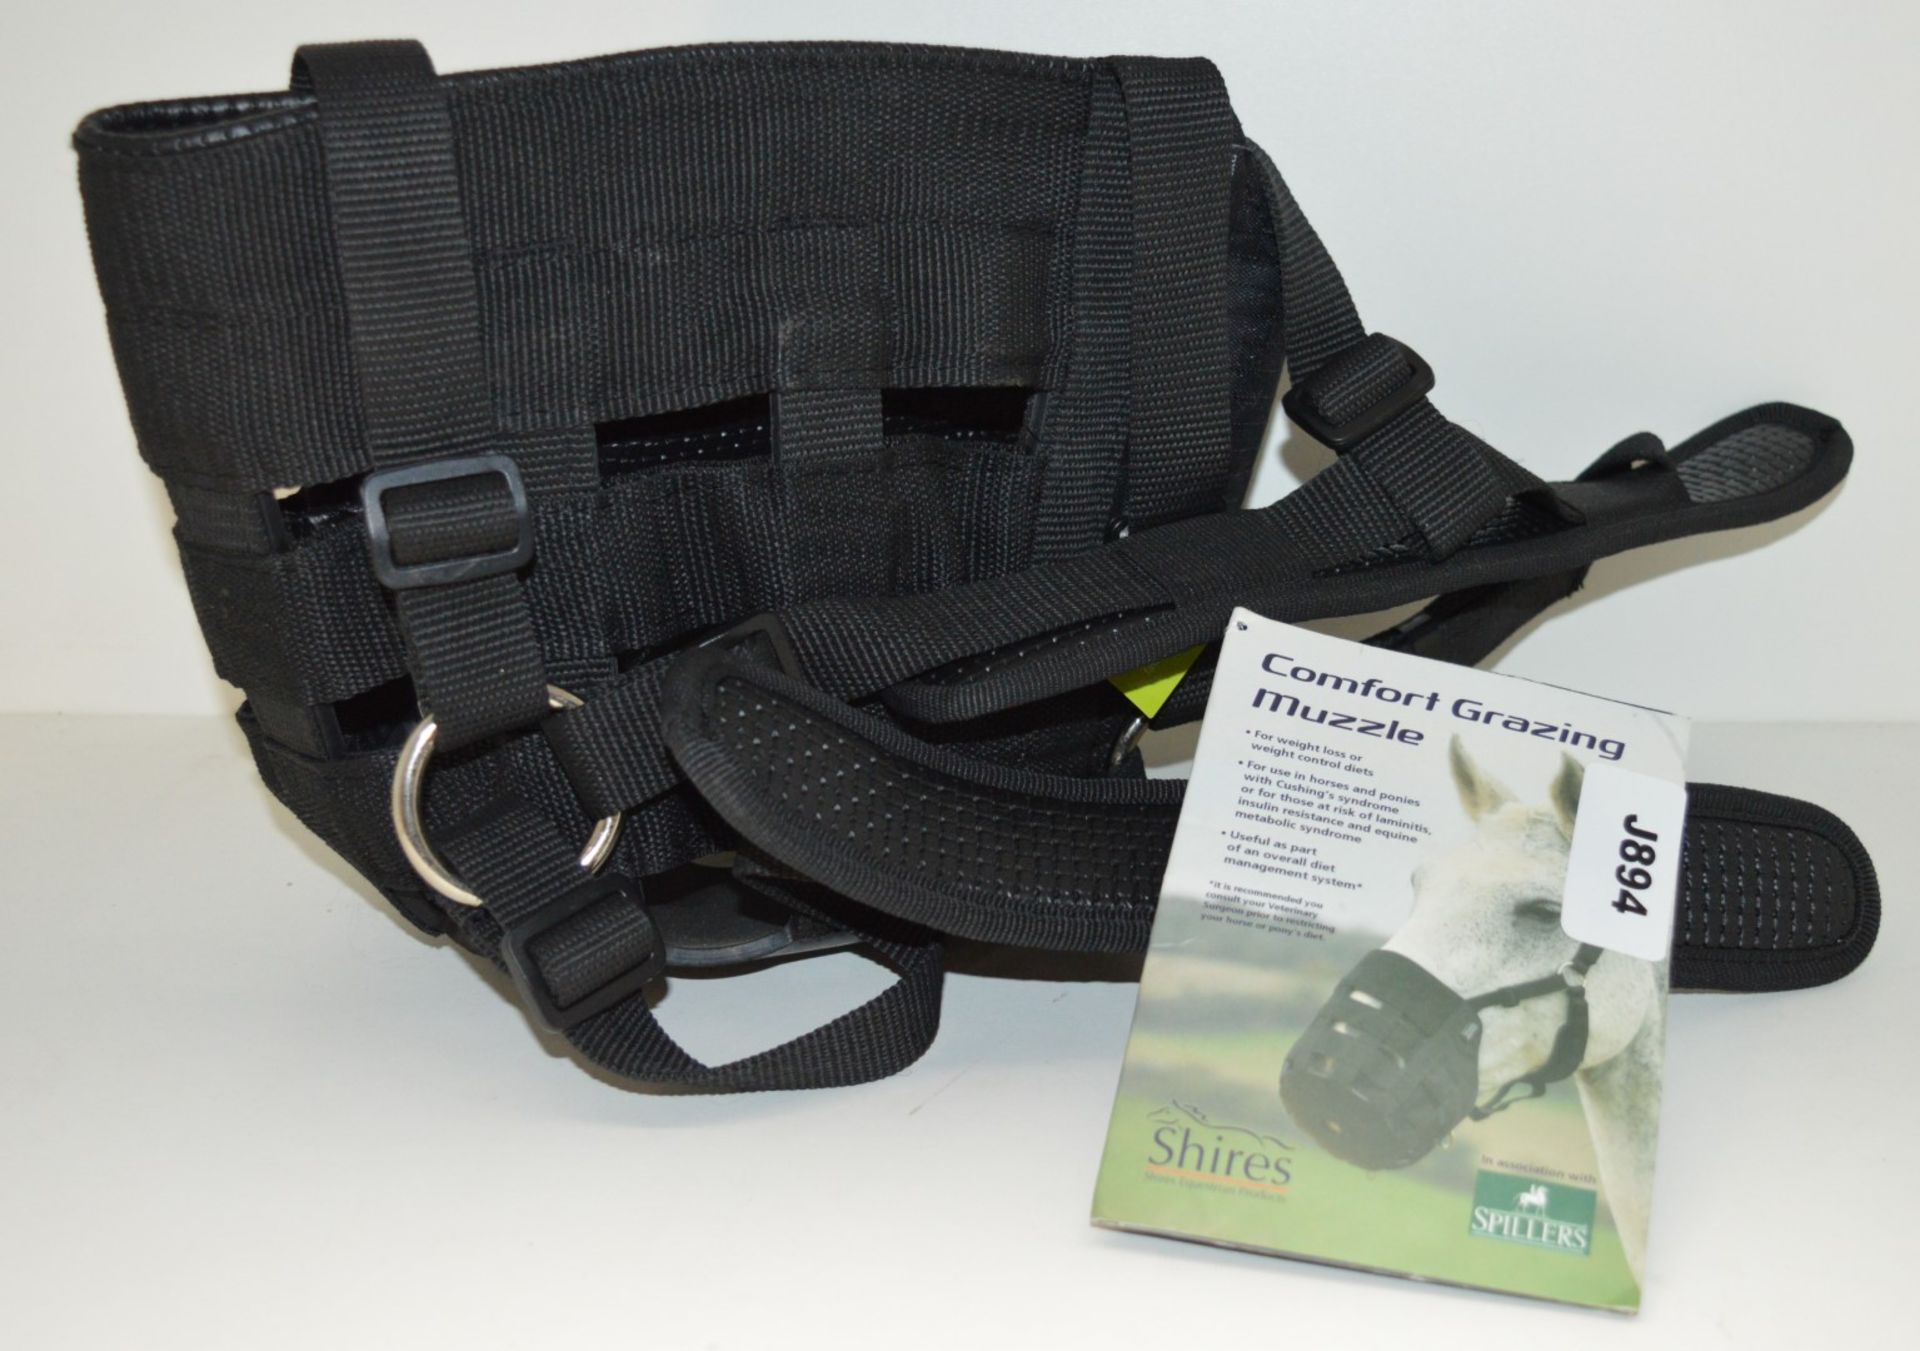 1 x Shires Comfort Grazing Muzzle - Full Size 495N Black - New Stock - CL401 - Ref J894 - - Image 4 of 4